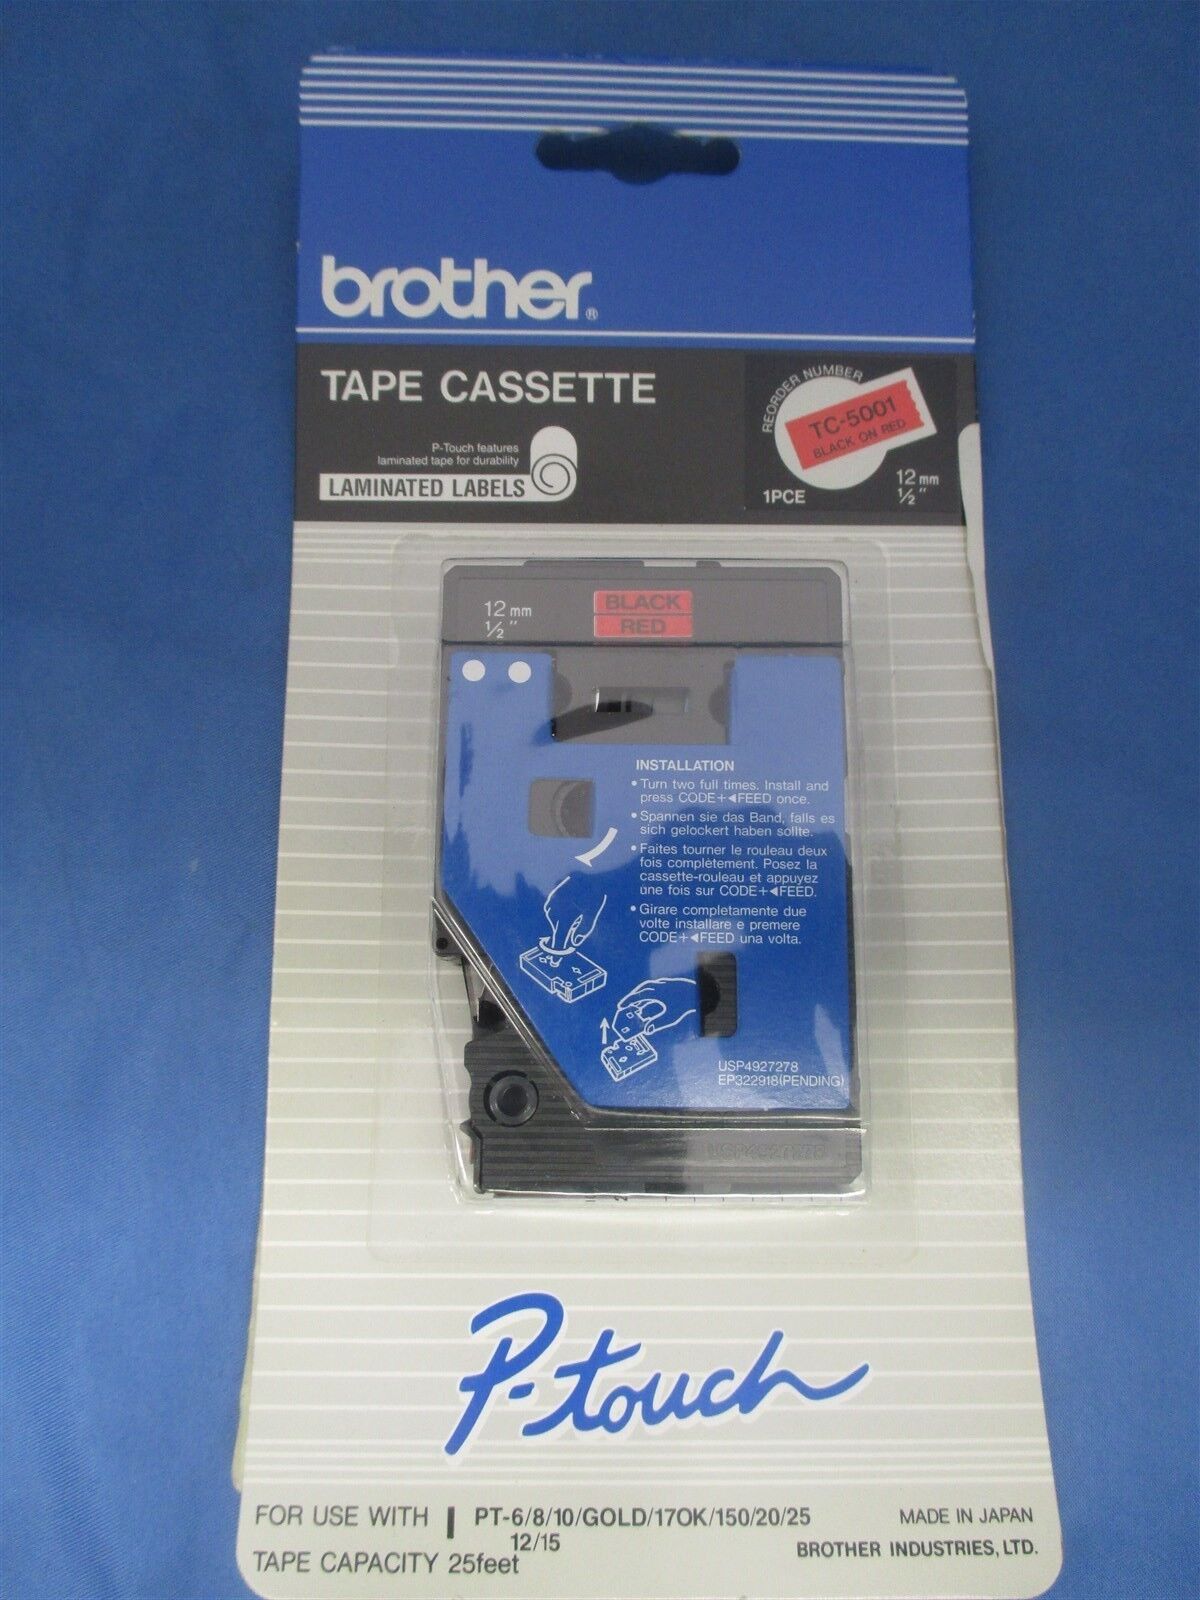 Brother P-touch Tape Cassette TC-5001